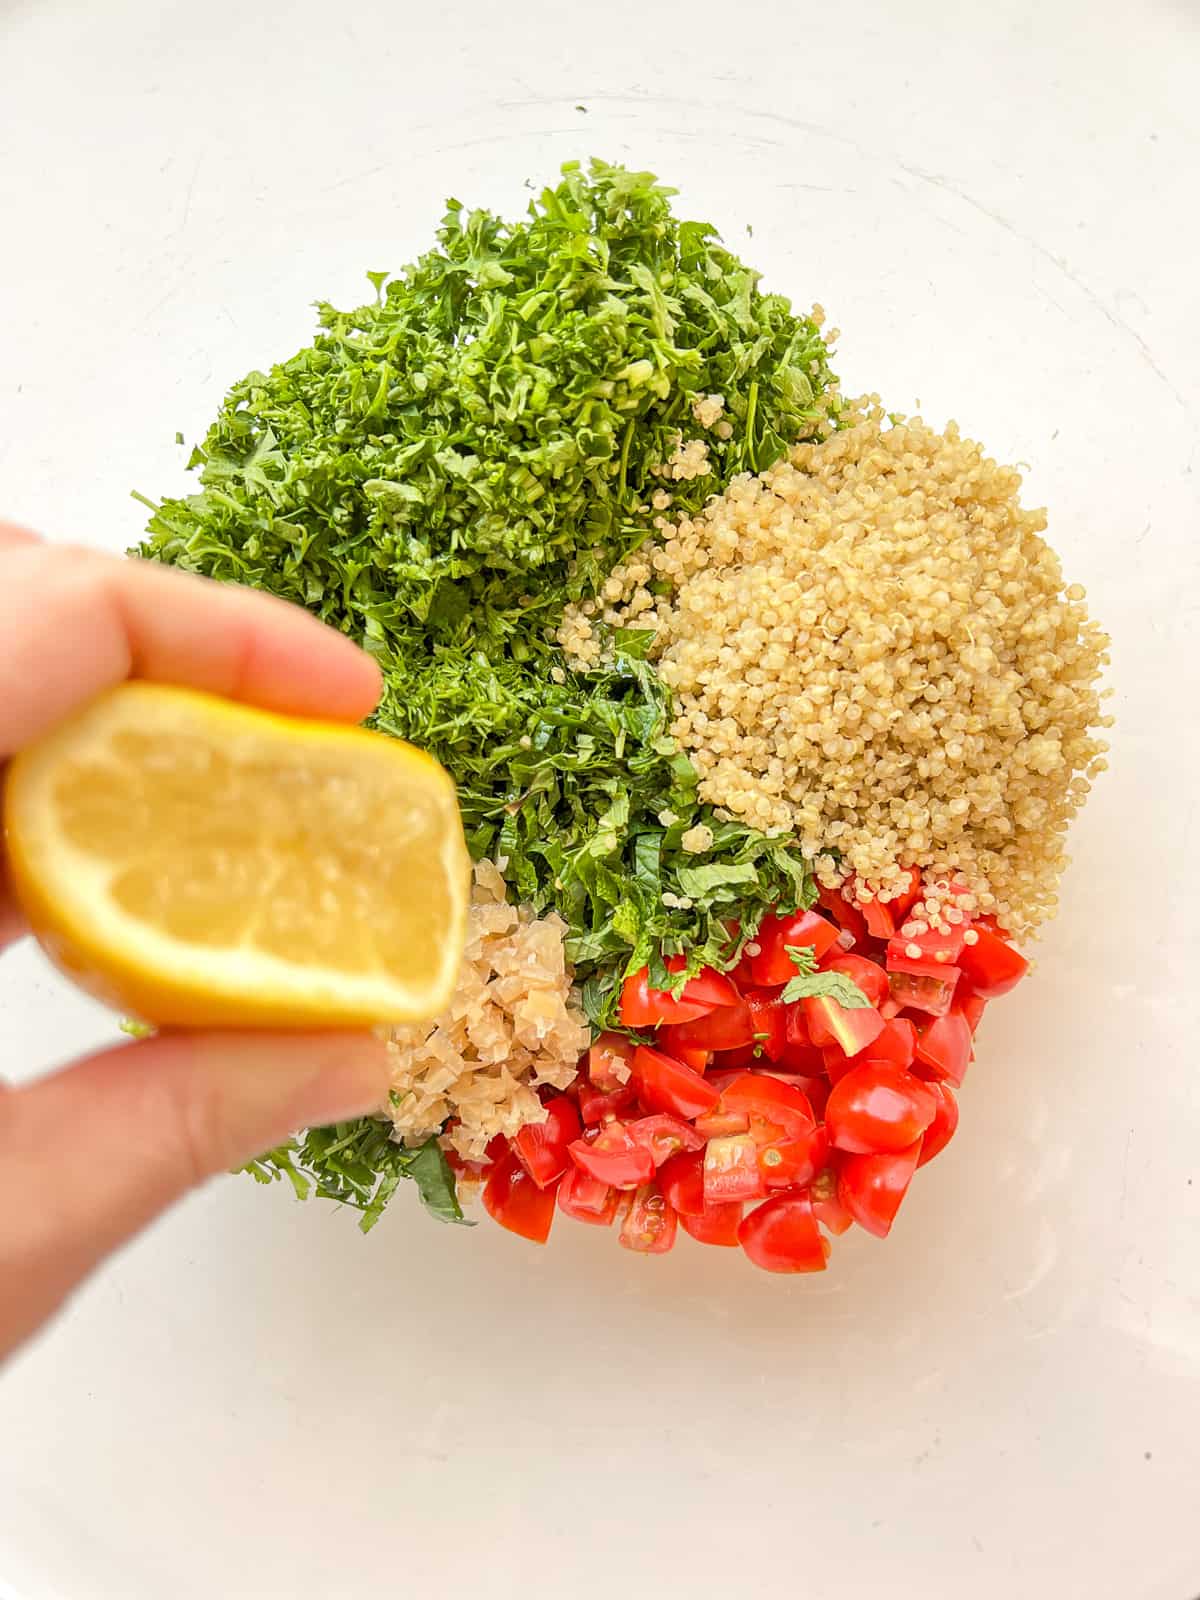 Lemon being squeezed into a bowl containing the ingredients for tabbouleh.